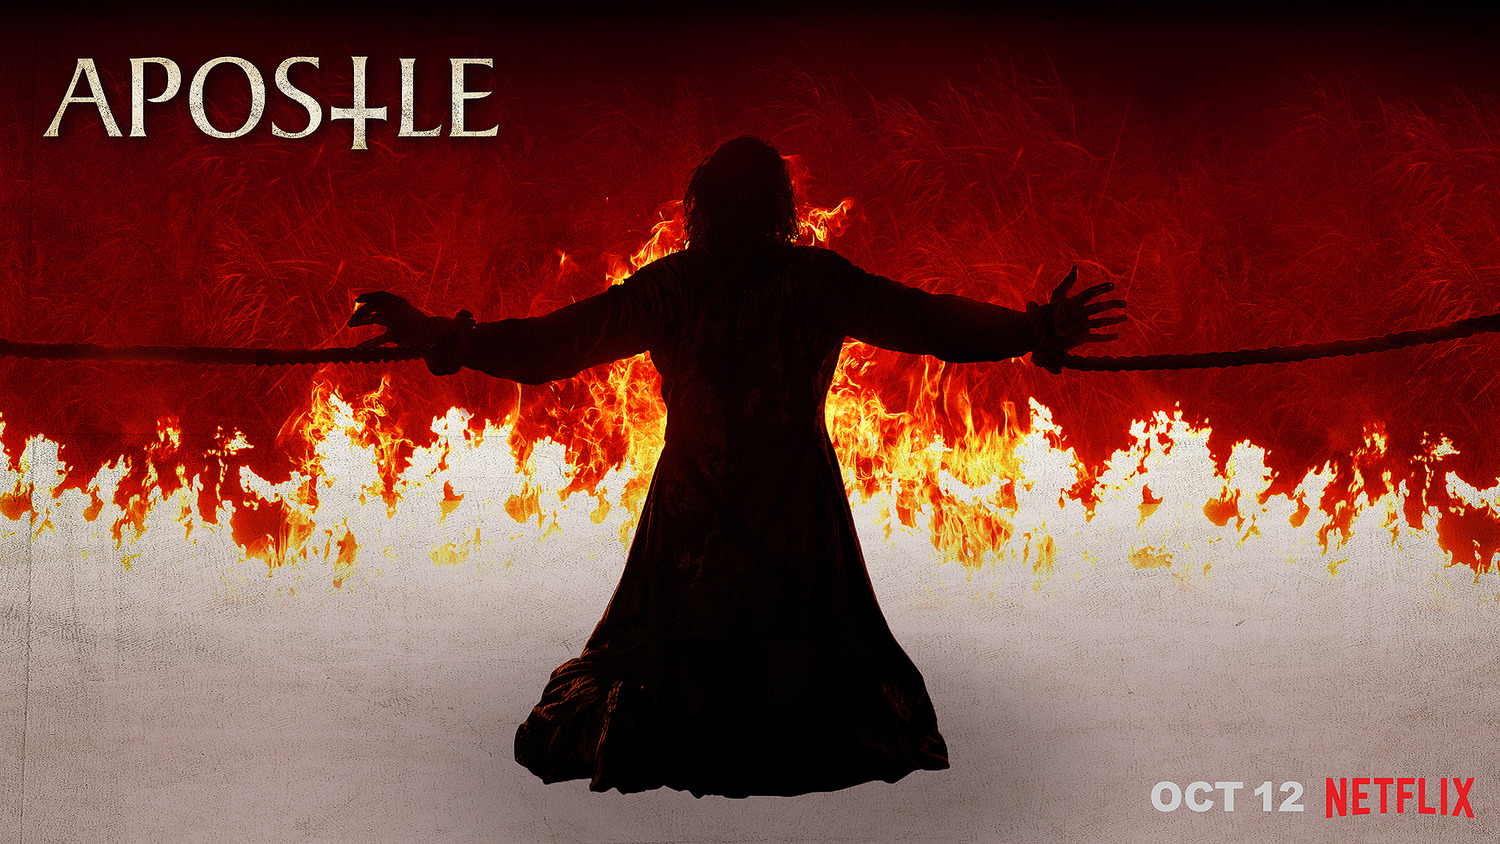 Extra Large TV Poster Image for Apostle (#2 of 5)